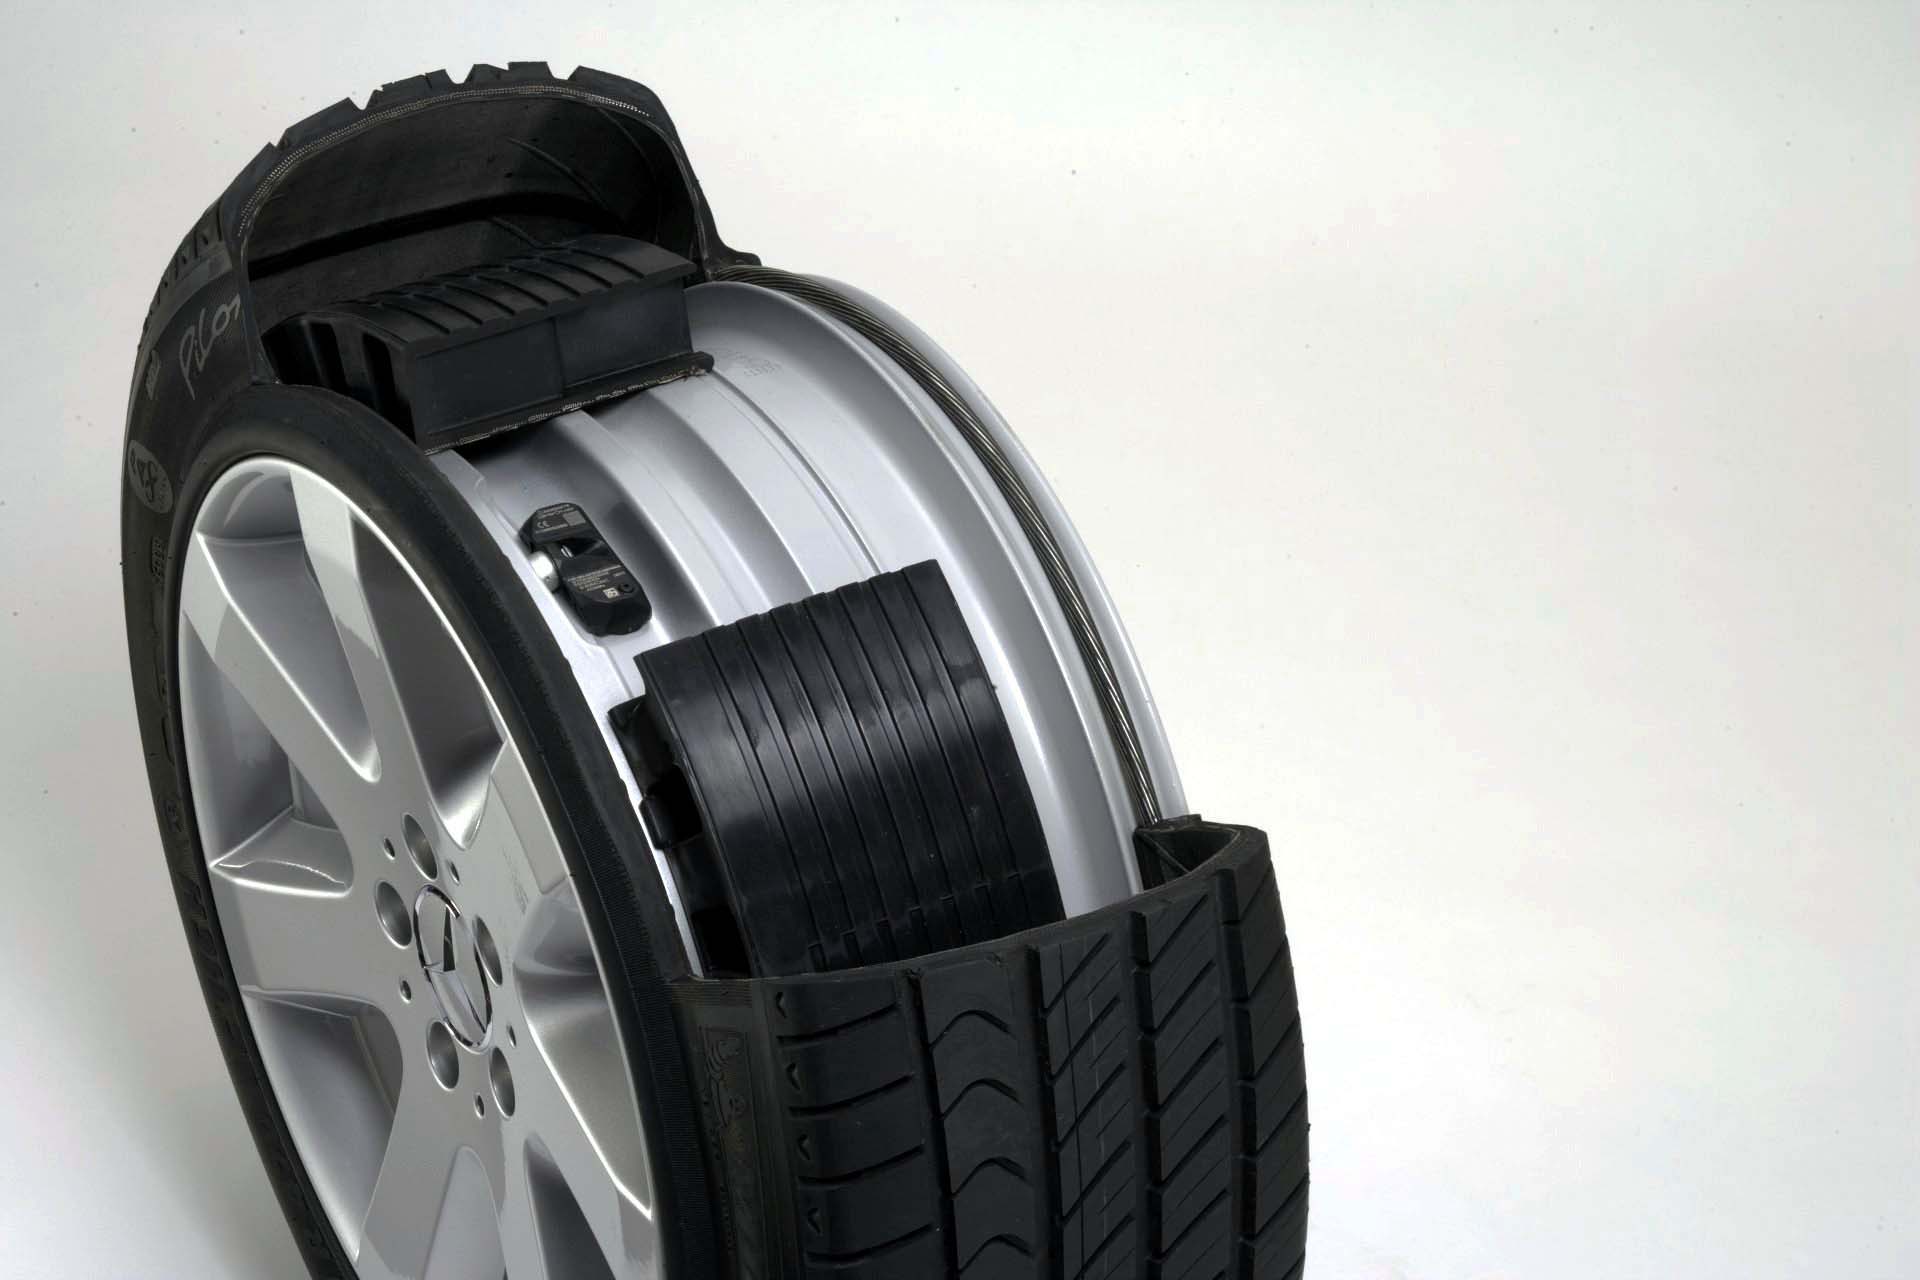 With run-flats, you can drive a limited distance at a limited speed after a loss of air, enabling you to limp your ride to a repair shop for a new tire, without having to install a spare. In this photo, we get a peek inside of a Bridgestone run-flat tire, and can see the support ring structure that holds the tire up if air is lost. Unfortunately, run-flats come with certain trade-offs, like a stiffer and noisier ride and higher replacement costs, while still being susceptible to sidewall flats.<br />
